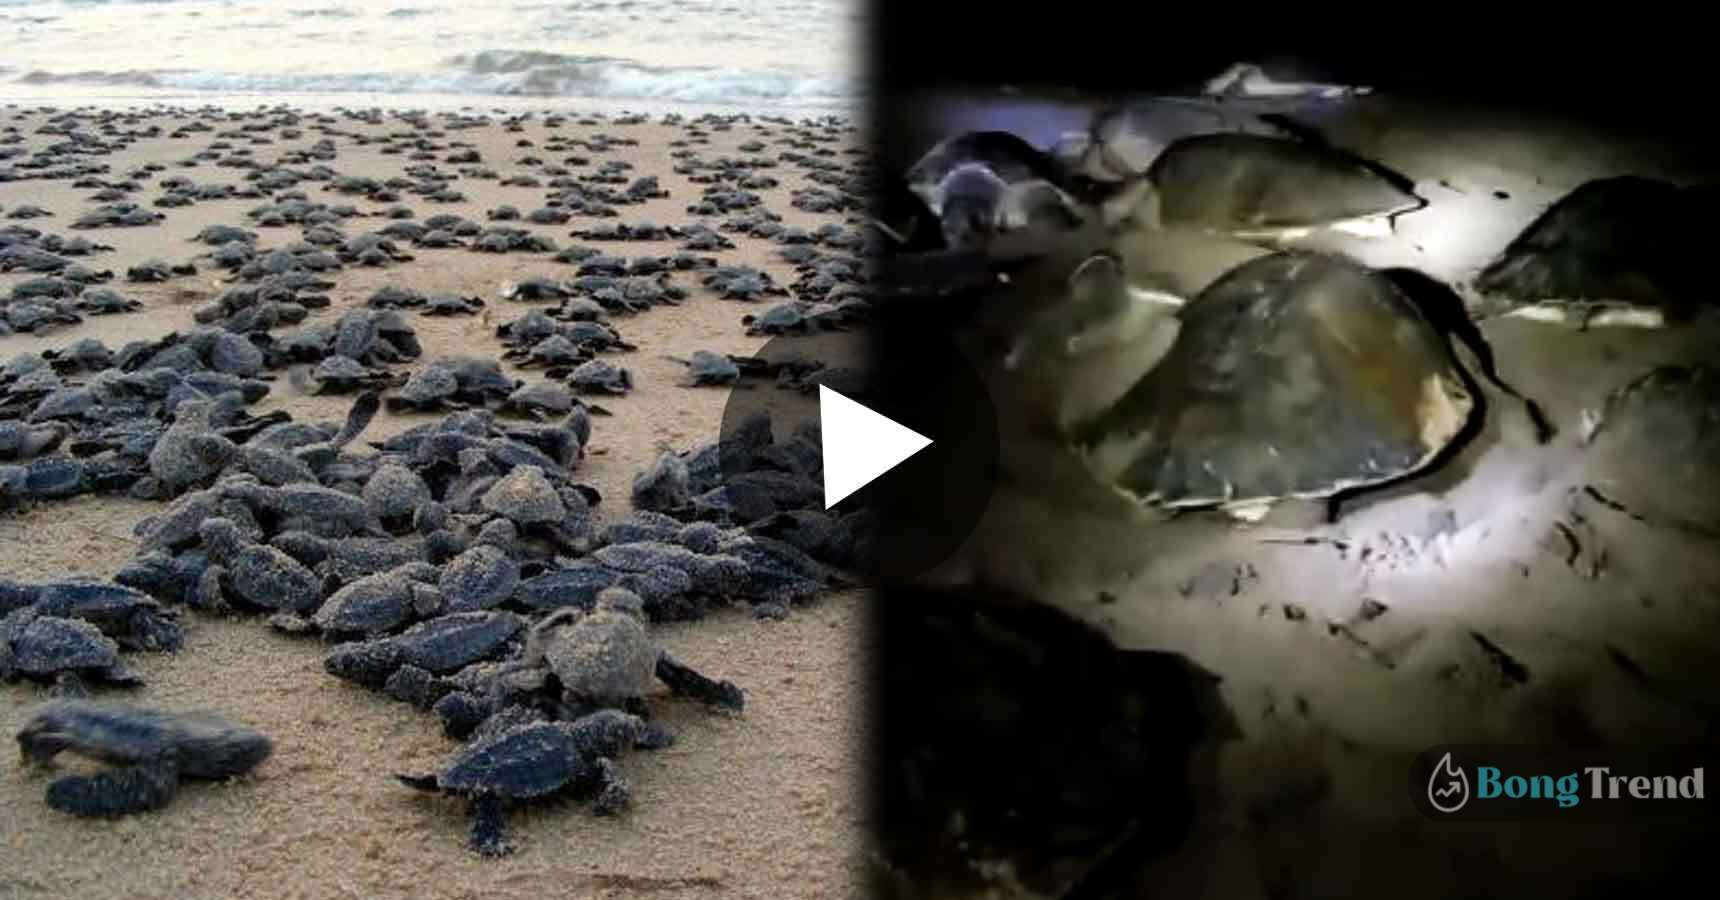 Viral VIdeo of thousands of turtles